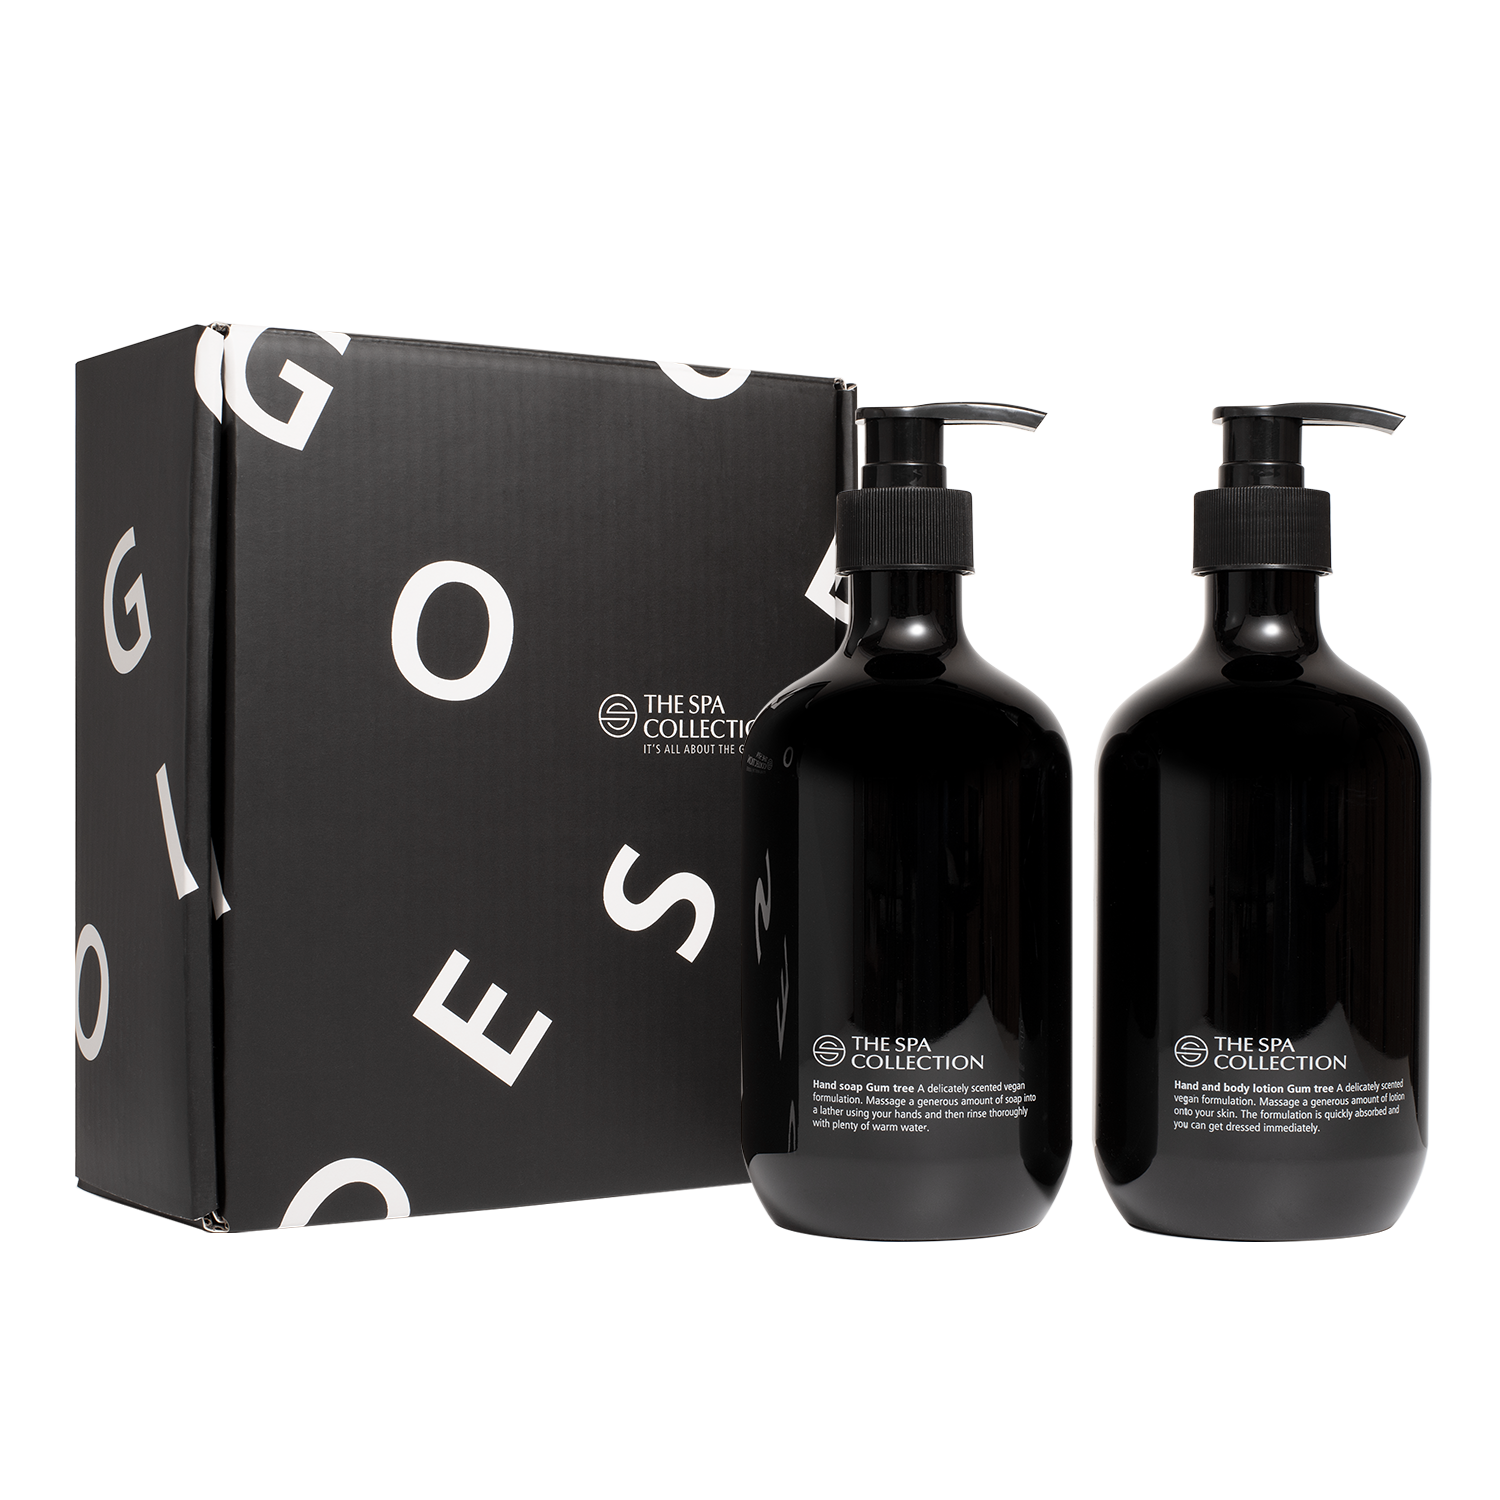 Eco-friendly Skincare Giftbox with hand soap + hand & body lotion - 475ml recycled bottle in Gum Tree fragrance in minimal modern black packaging by The Spa Collection 